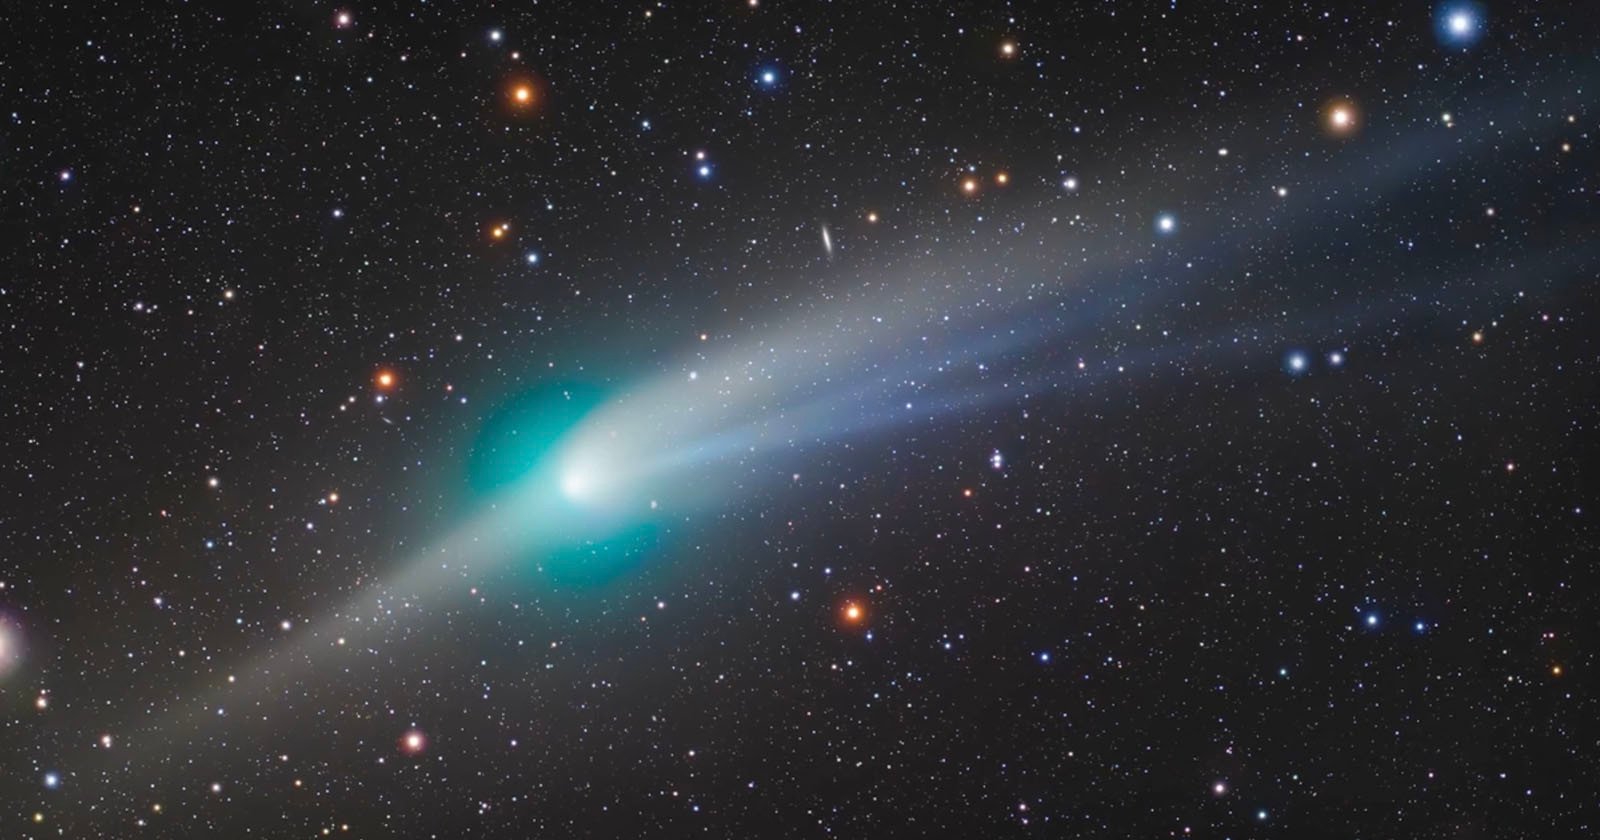 Timelapse of the Green Comet that Passed Through our Solar System